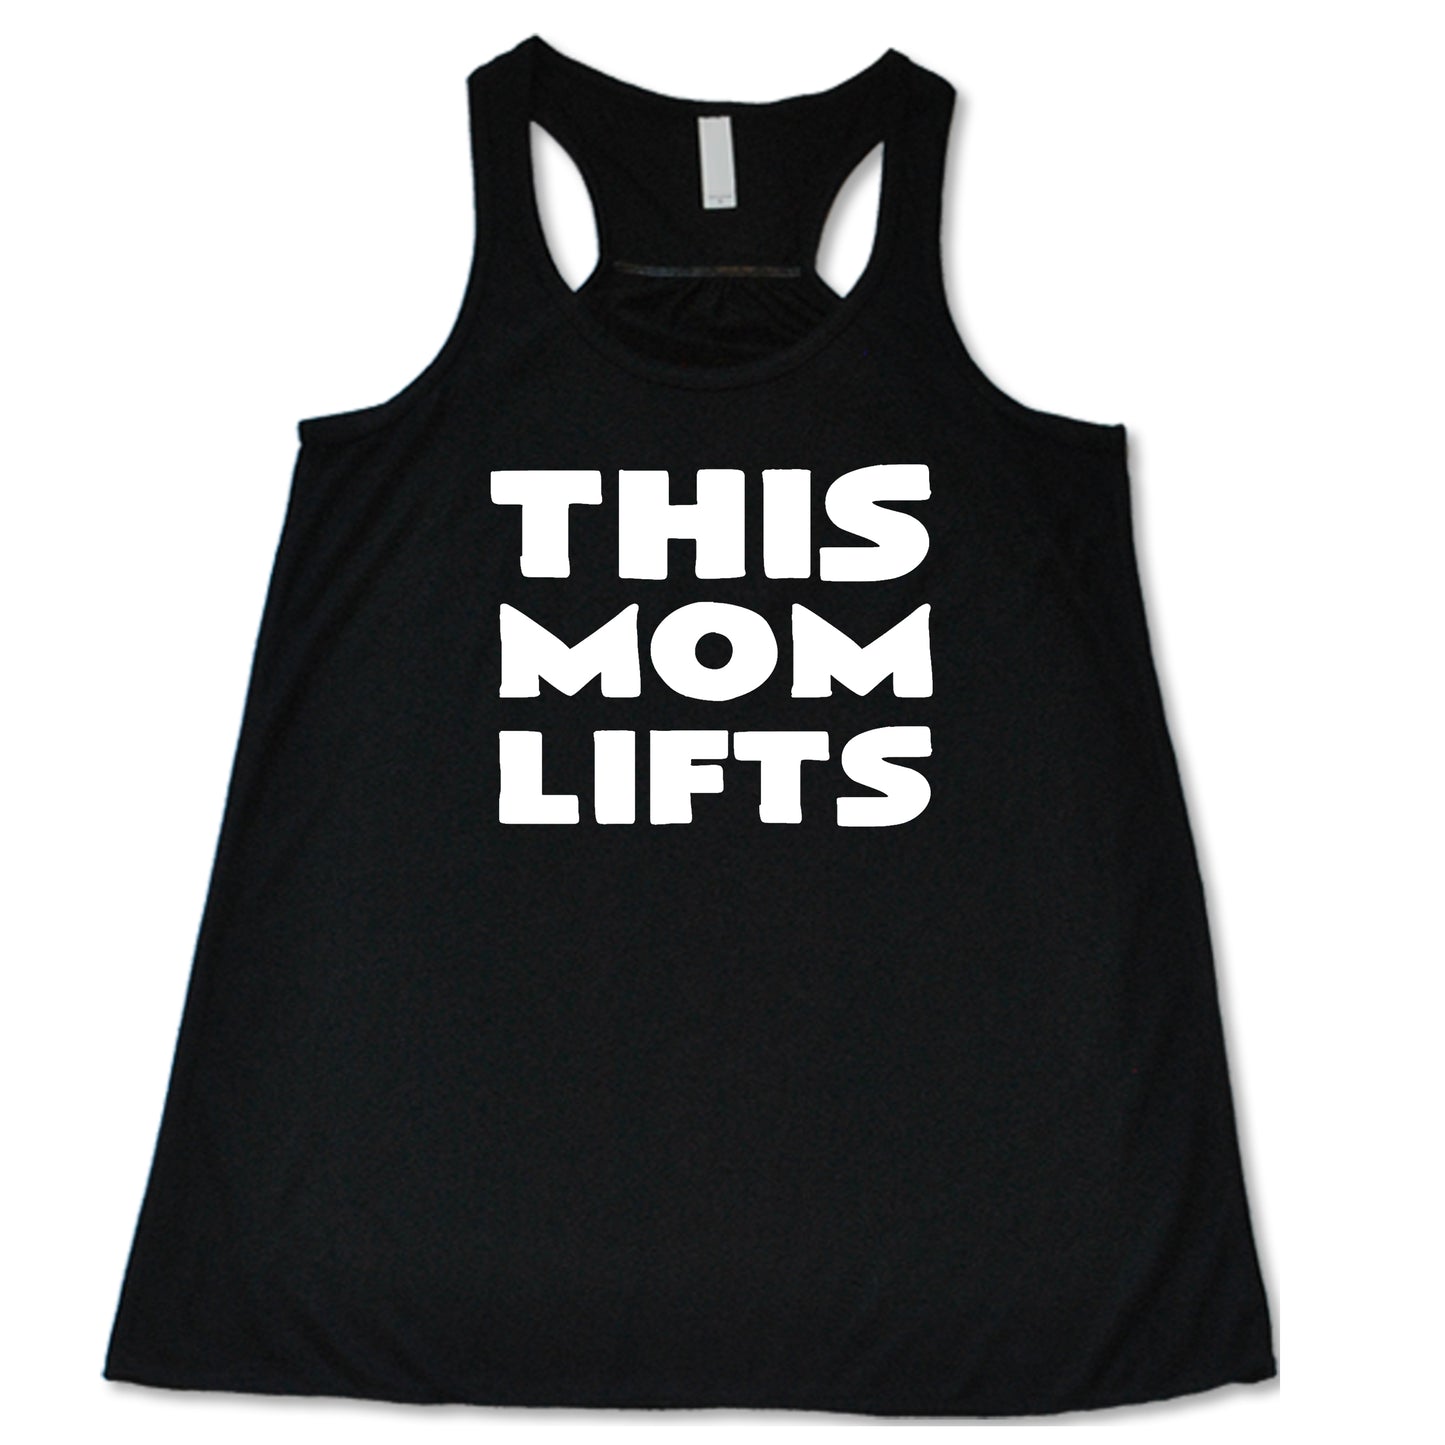 black racerback shirt with the saying "this mom lifts" in the center in white lettering 